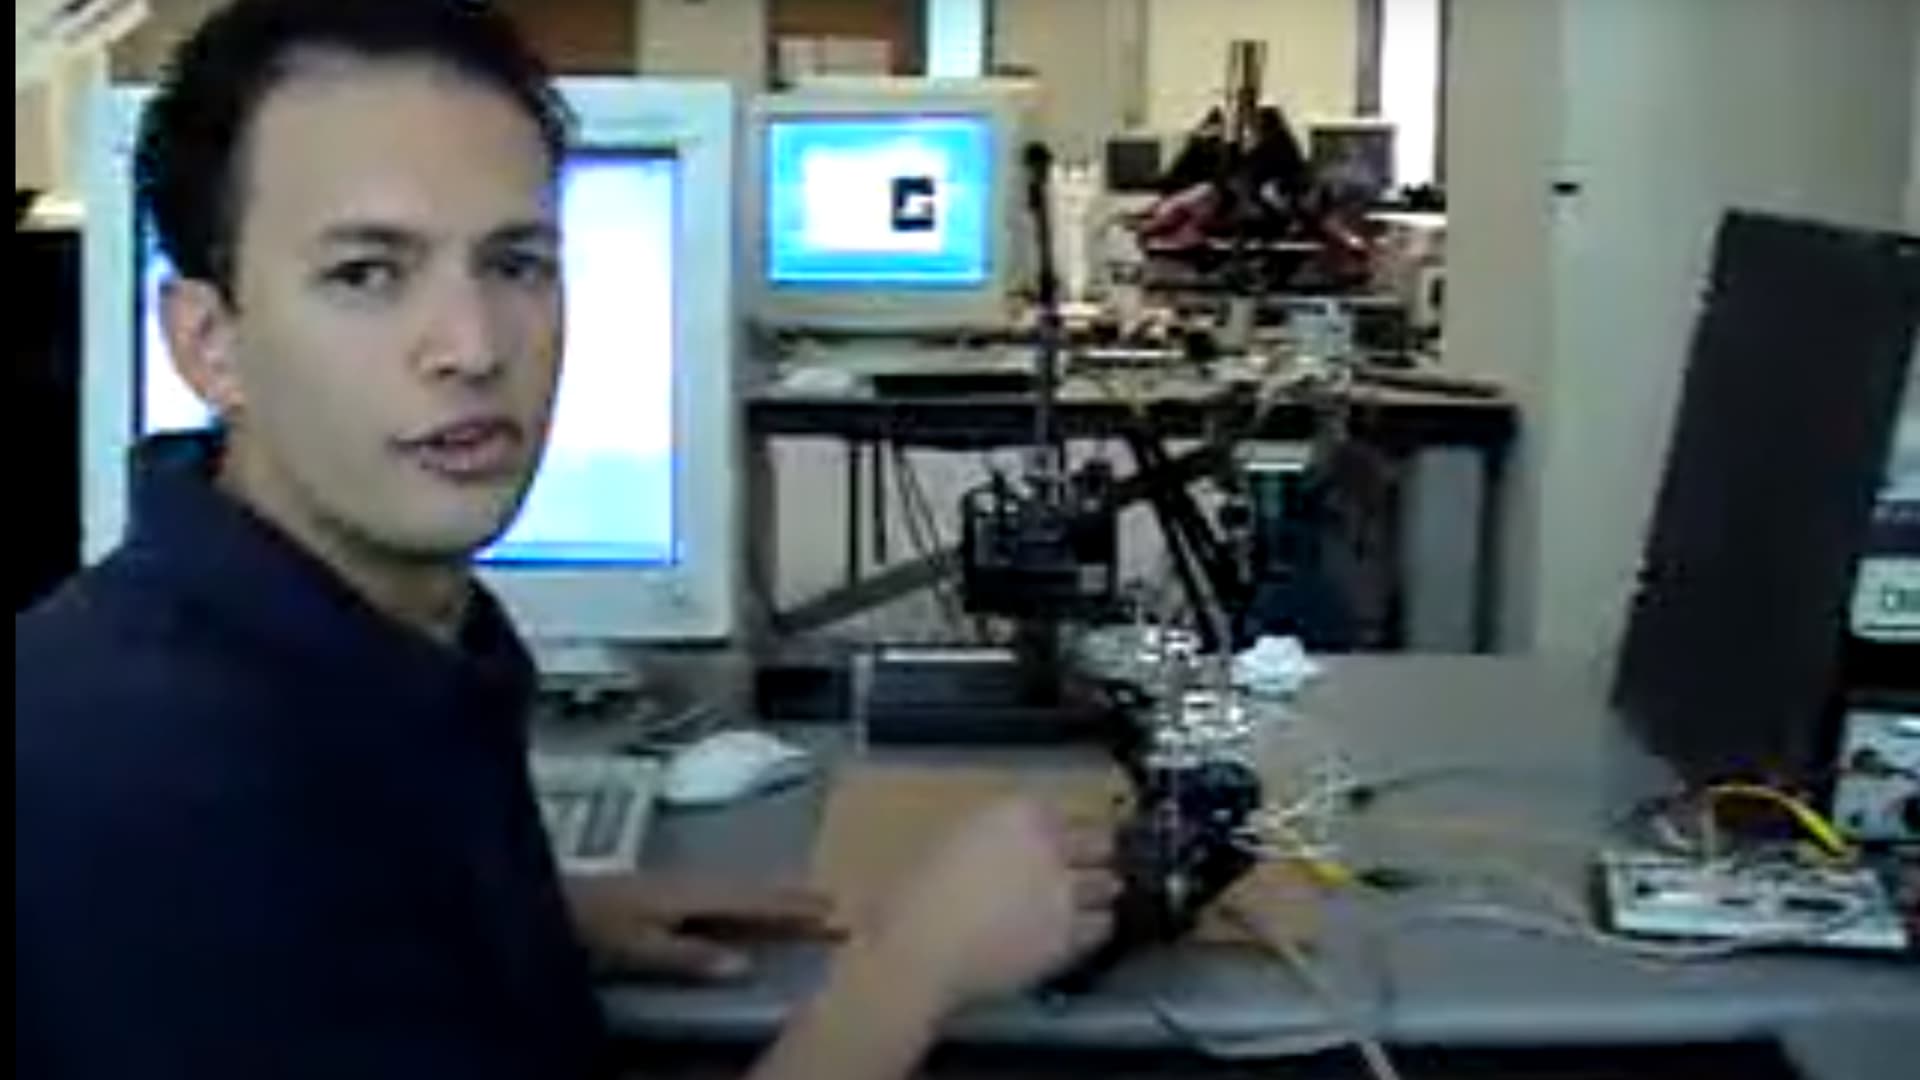 Selinger, in college, presenting a force-feedback robot research project at Stanford's robotics lab.